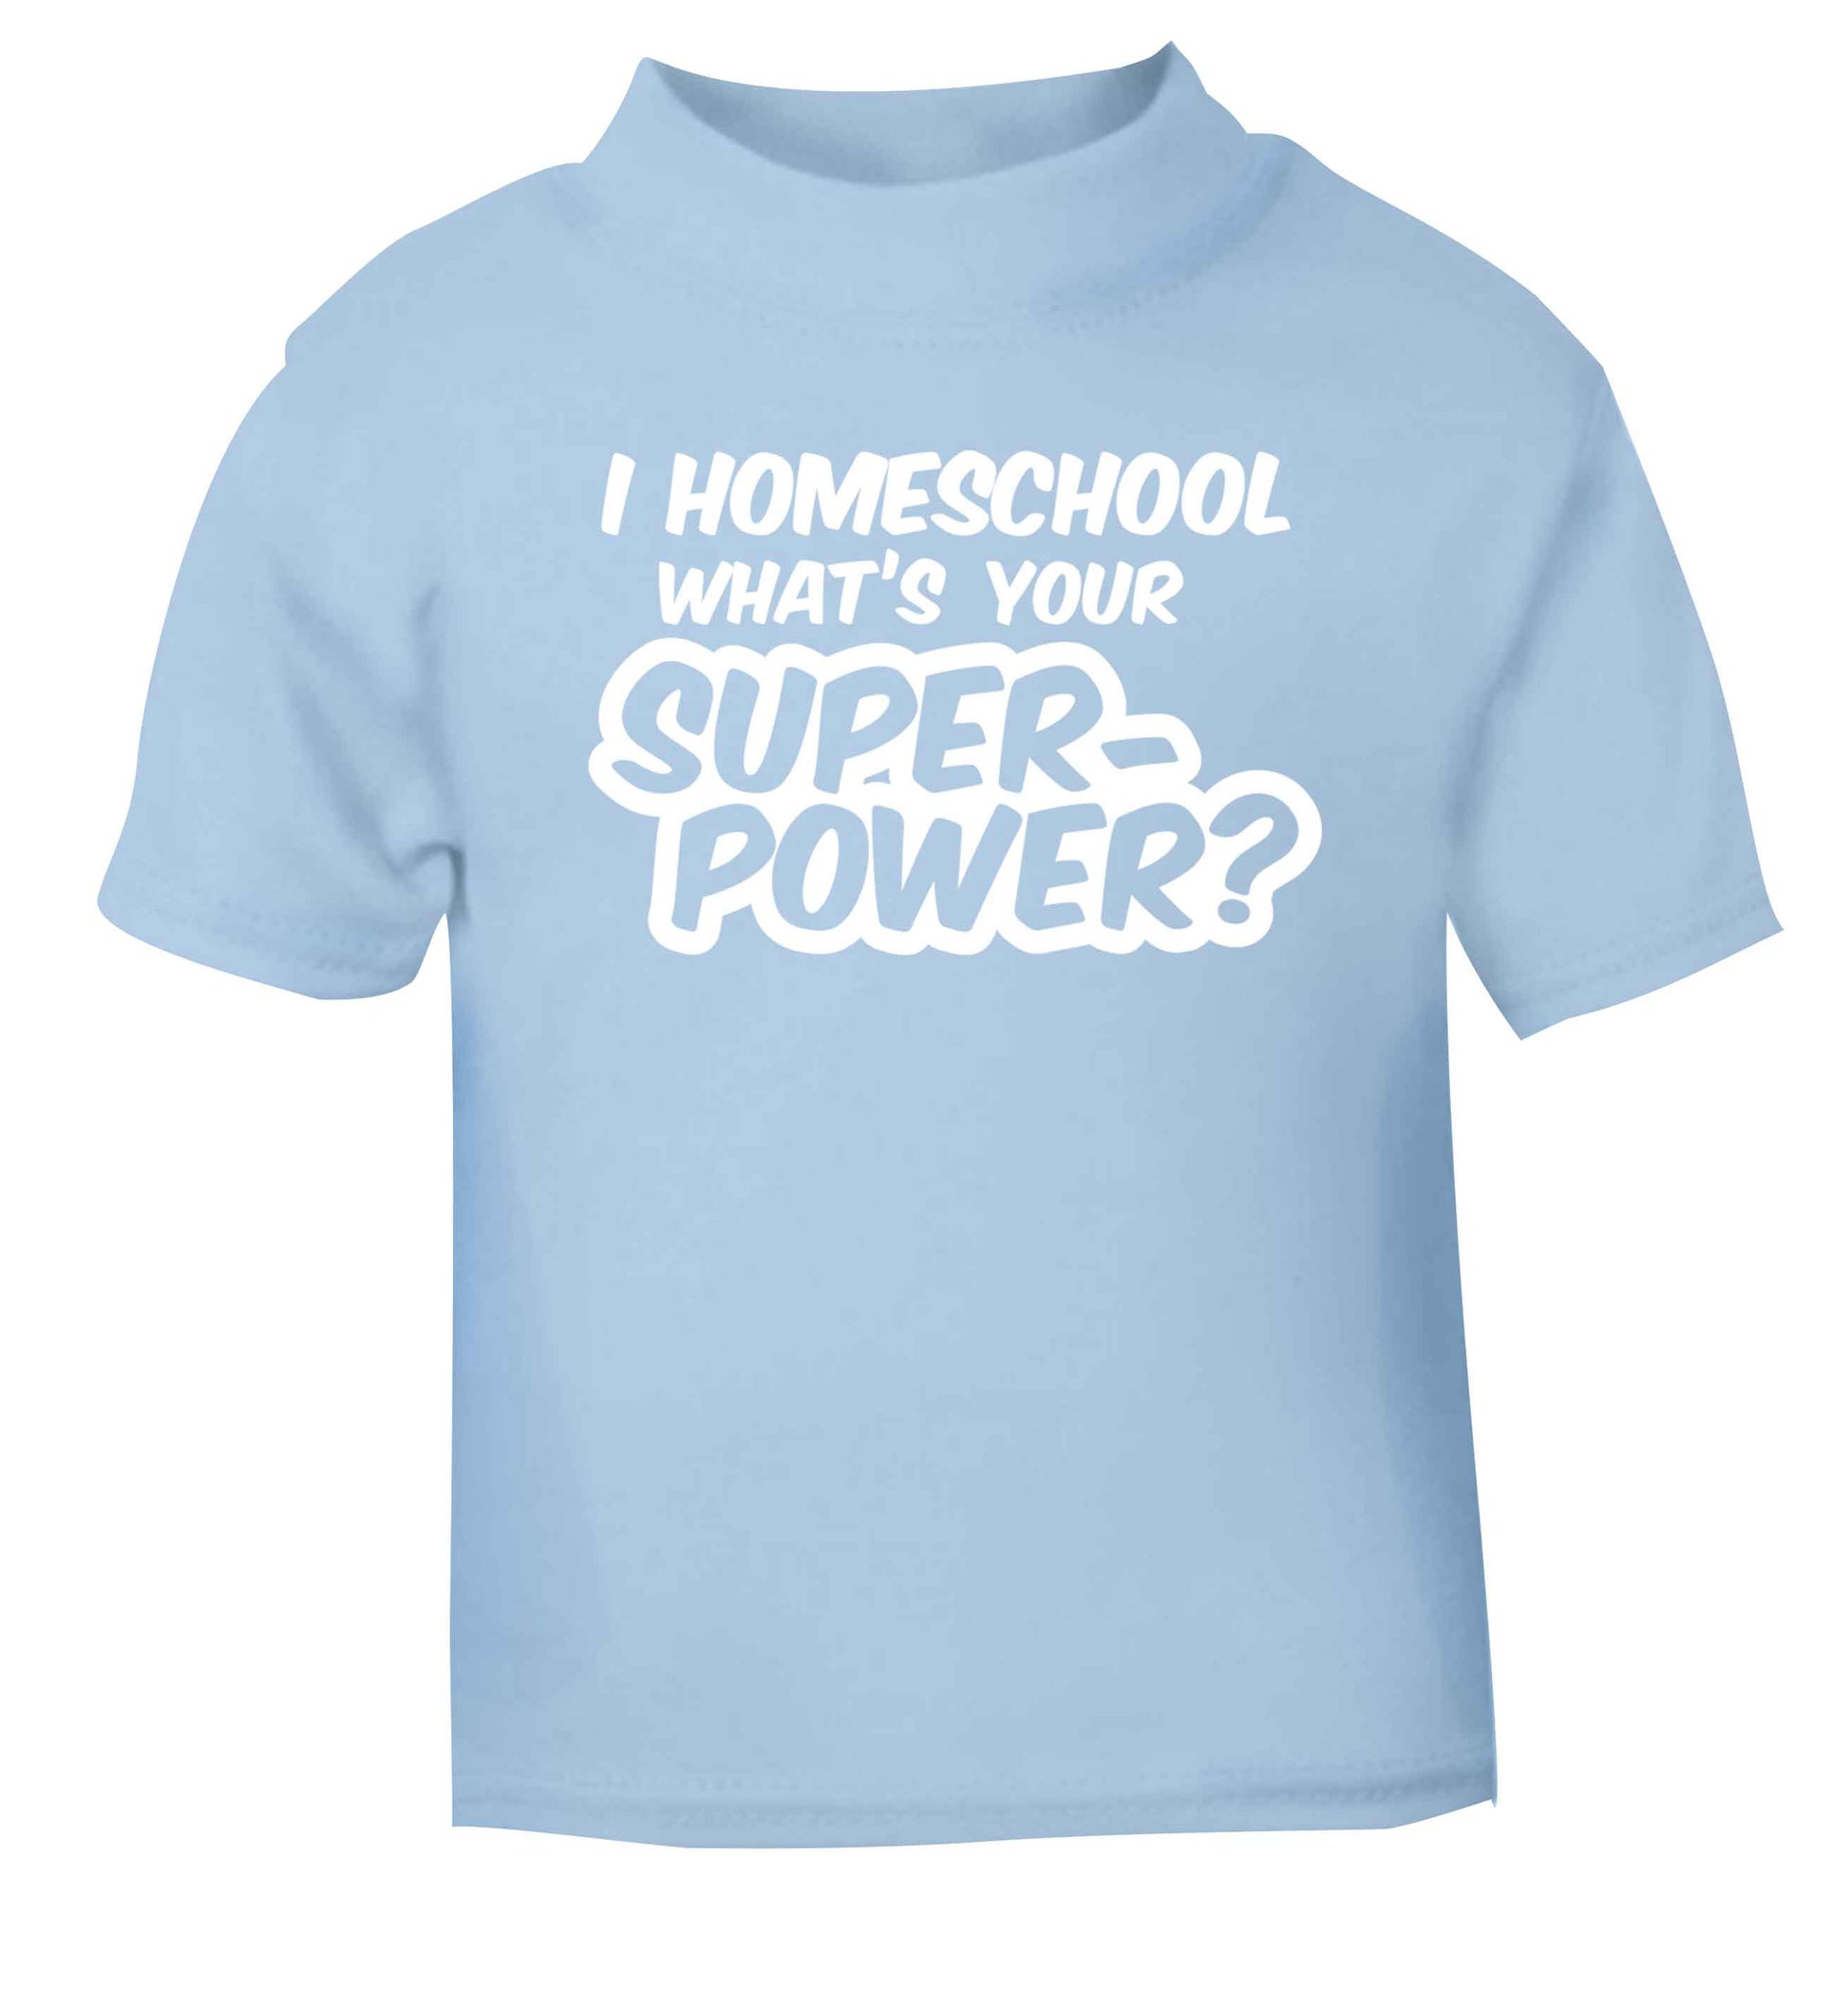 I homeschool what's your superpower? light blue Baby Toddler Tshirt 2 Years